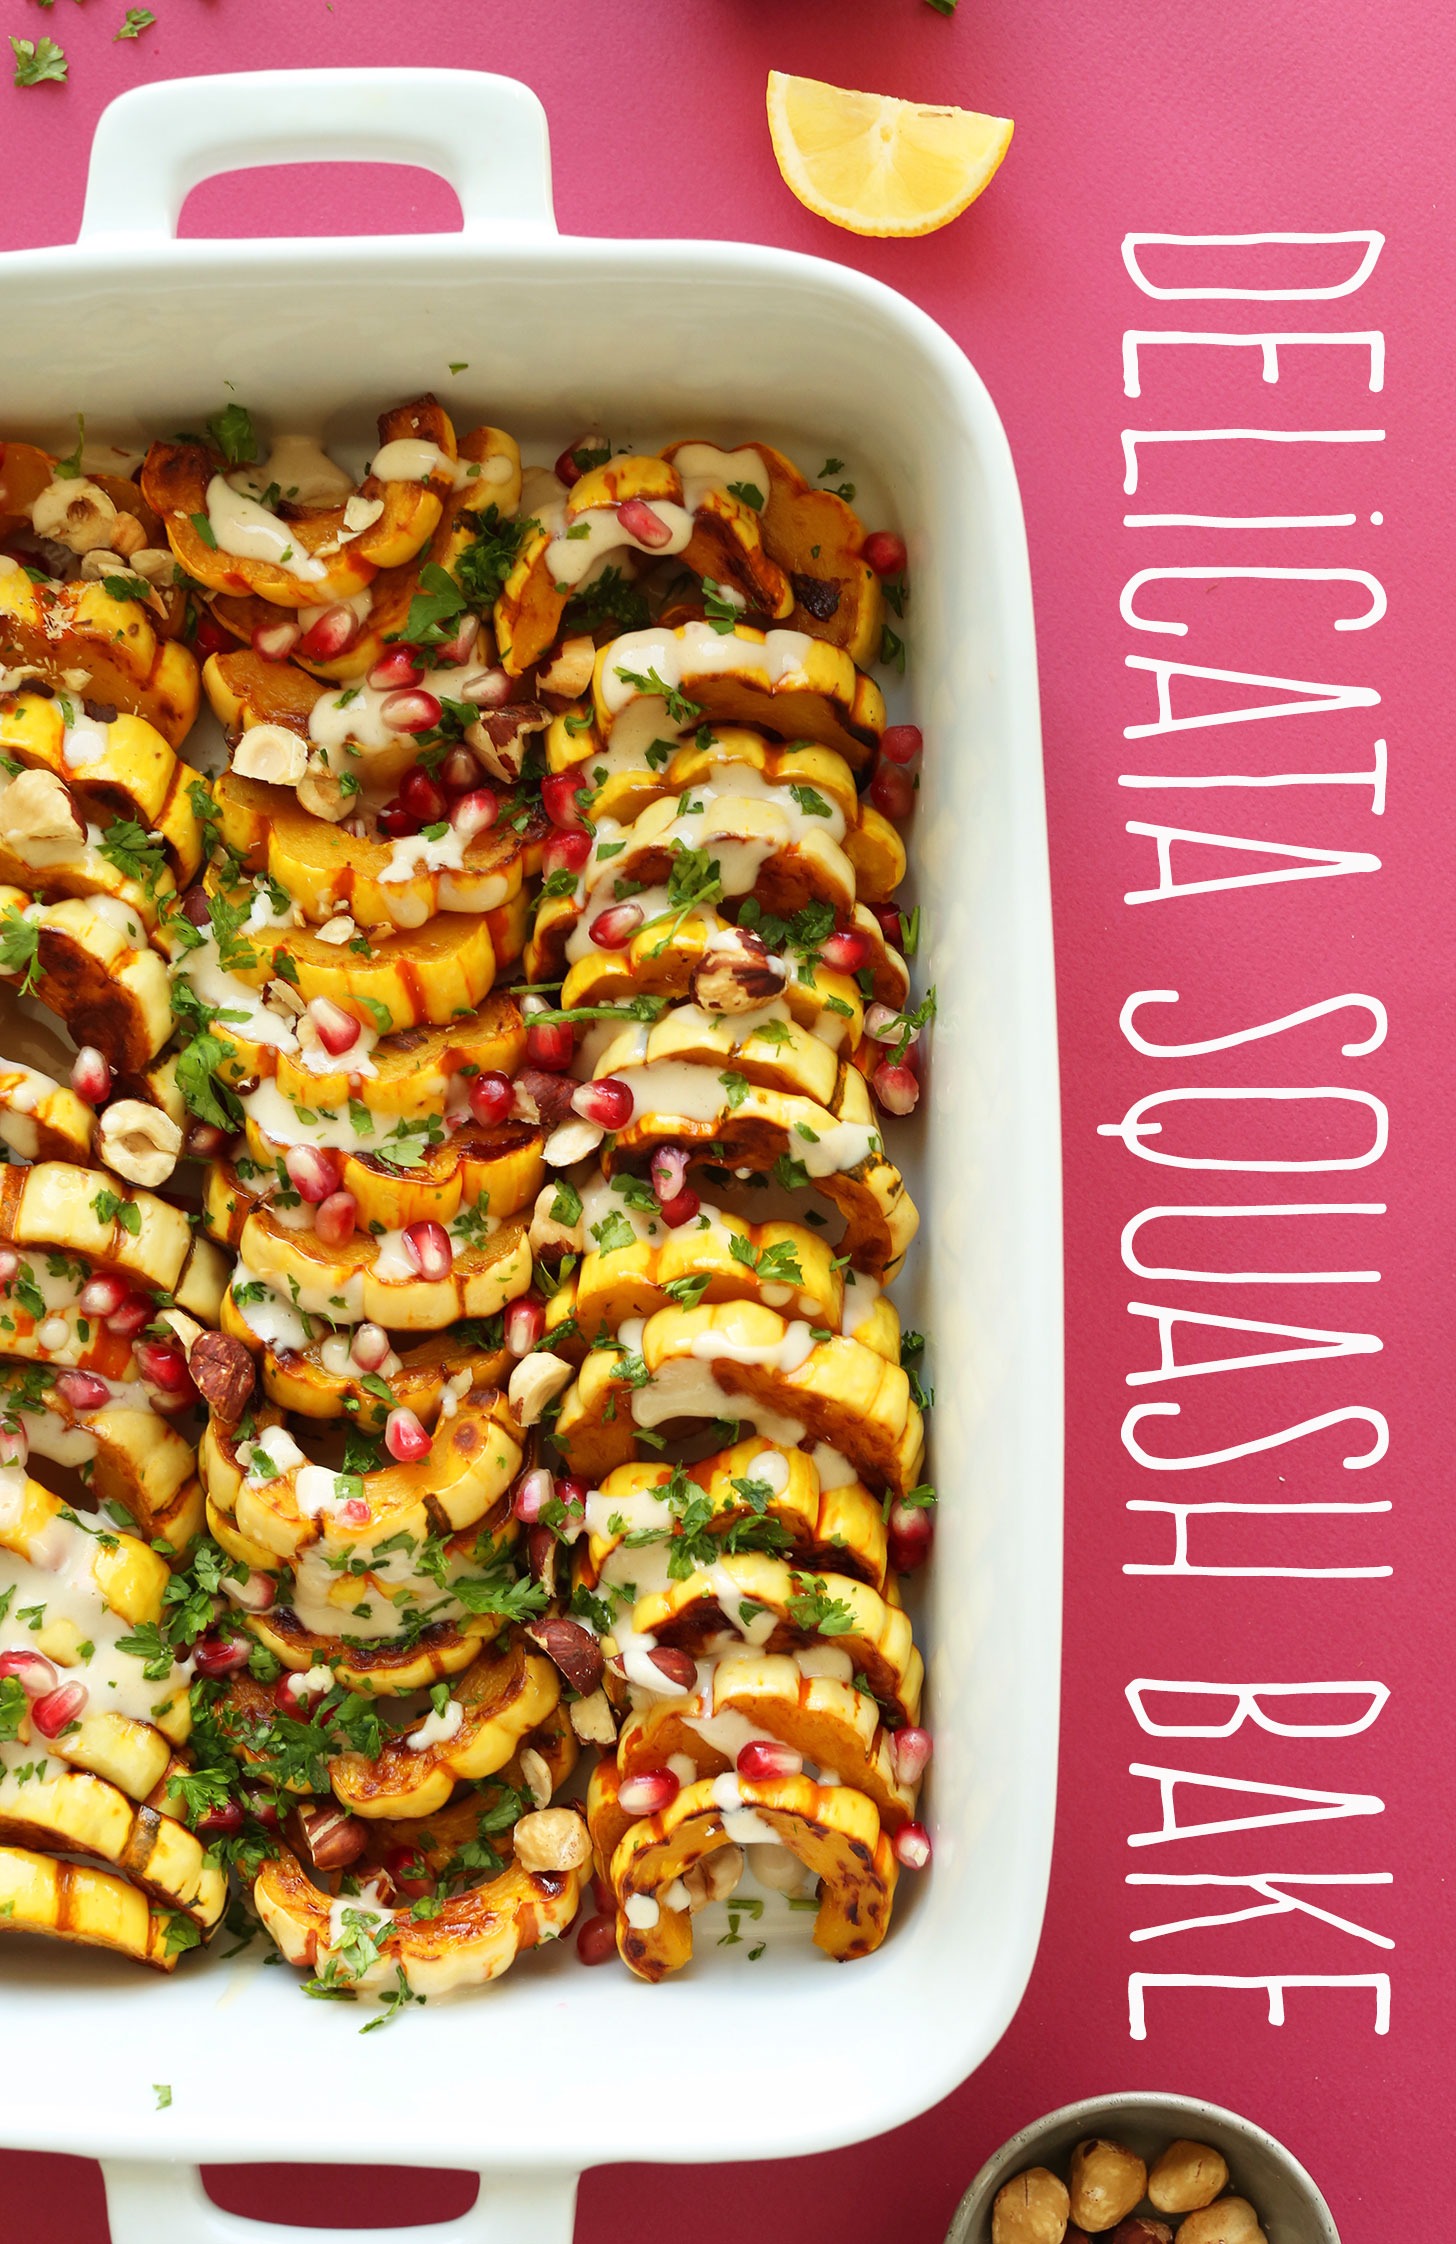 Baking pan filled with our gluten-free Delicata Squash Bake with Hazelnuts, Pomegranates, and Tahini Sauce